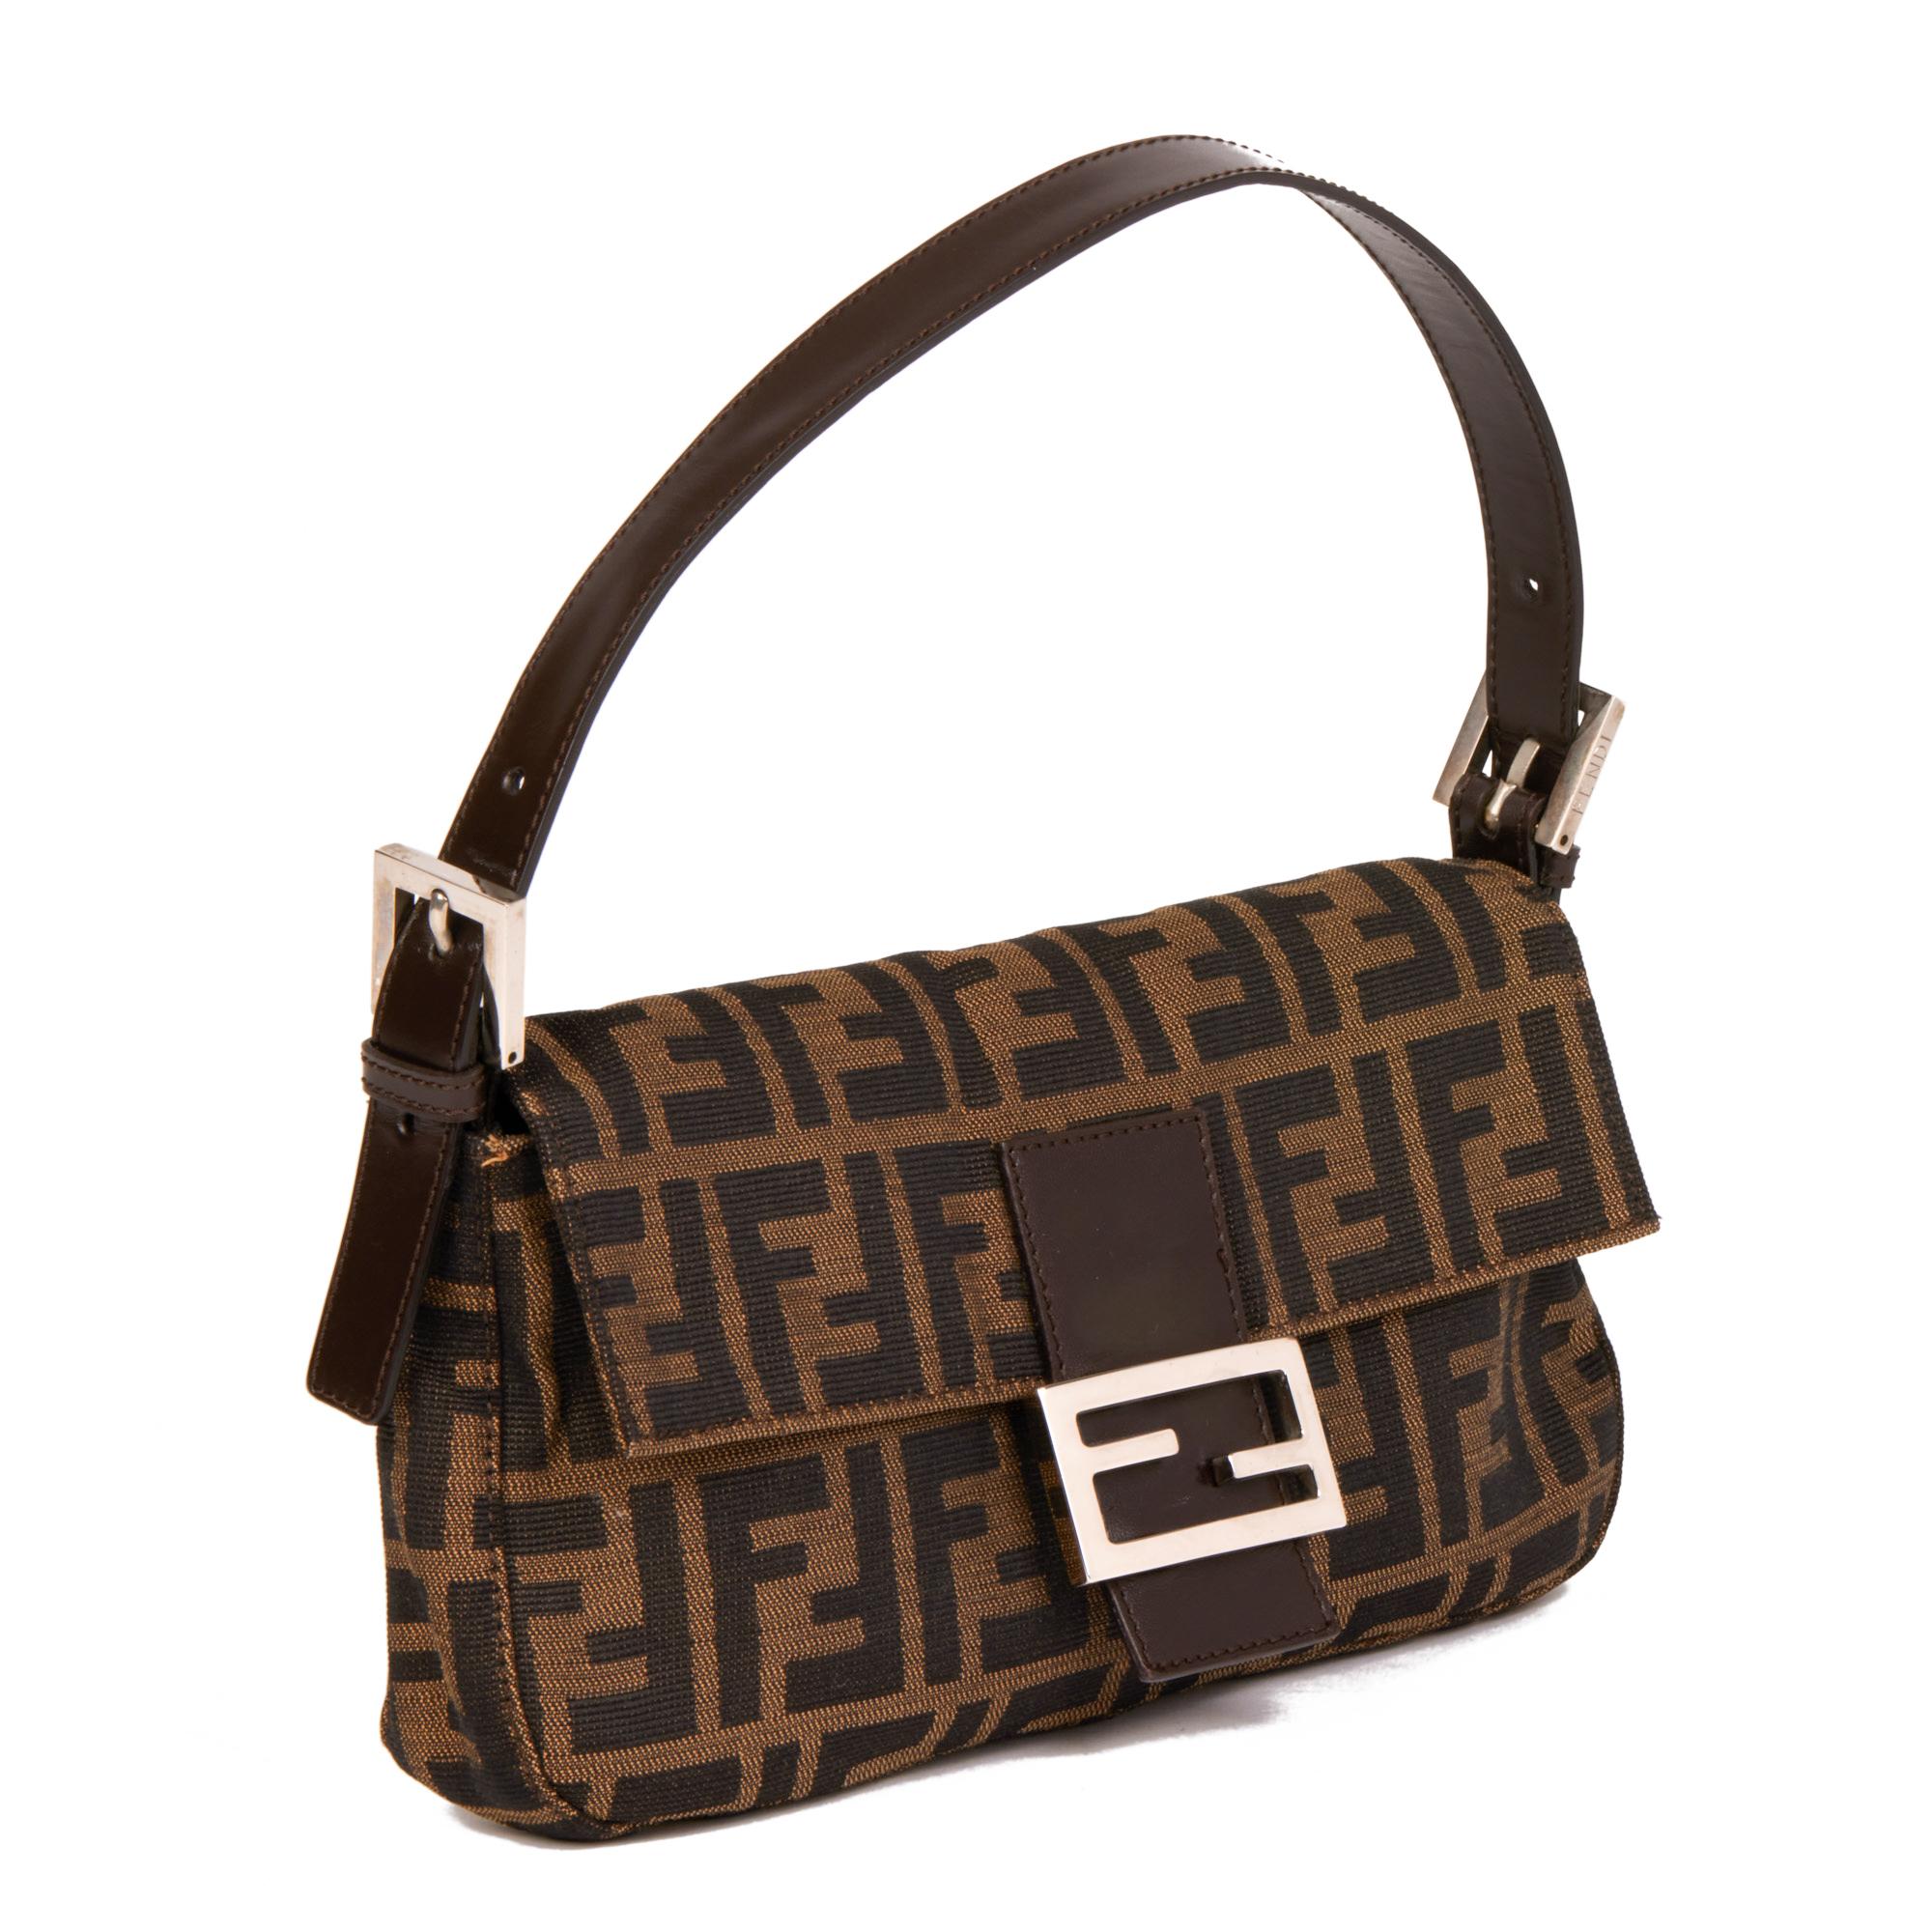 FENDI
Brown Zucca Canvas & Calfskin Leather Vintage Baguette

Xupes Reference: HB4295
Serial Number: 2282 6424 008
Age (Circa): 2000
Authenticity Details: Date Stamp (Made in Italy)
Gender: Ladies
Type: Shoulder, Top Handle

Colour: Brown
Hardware: